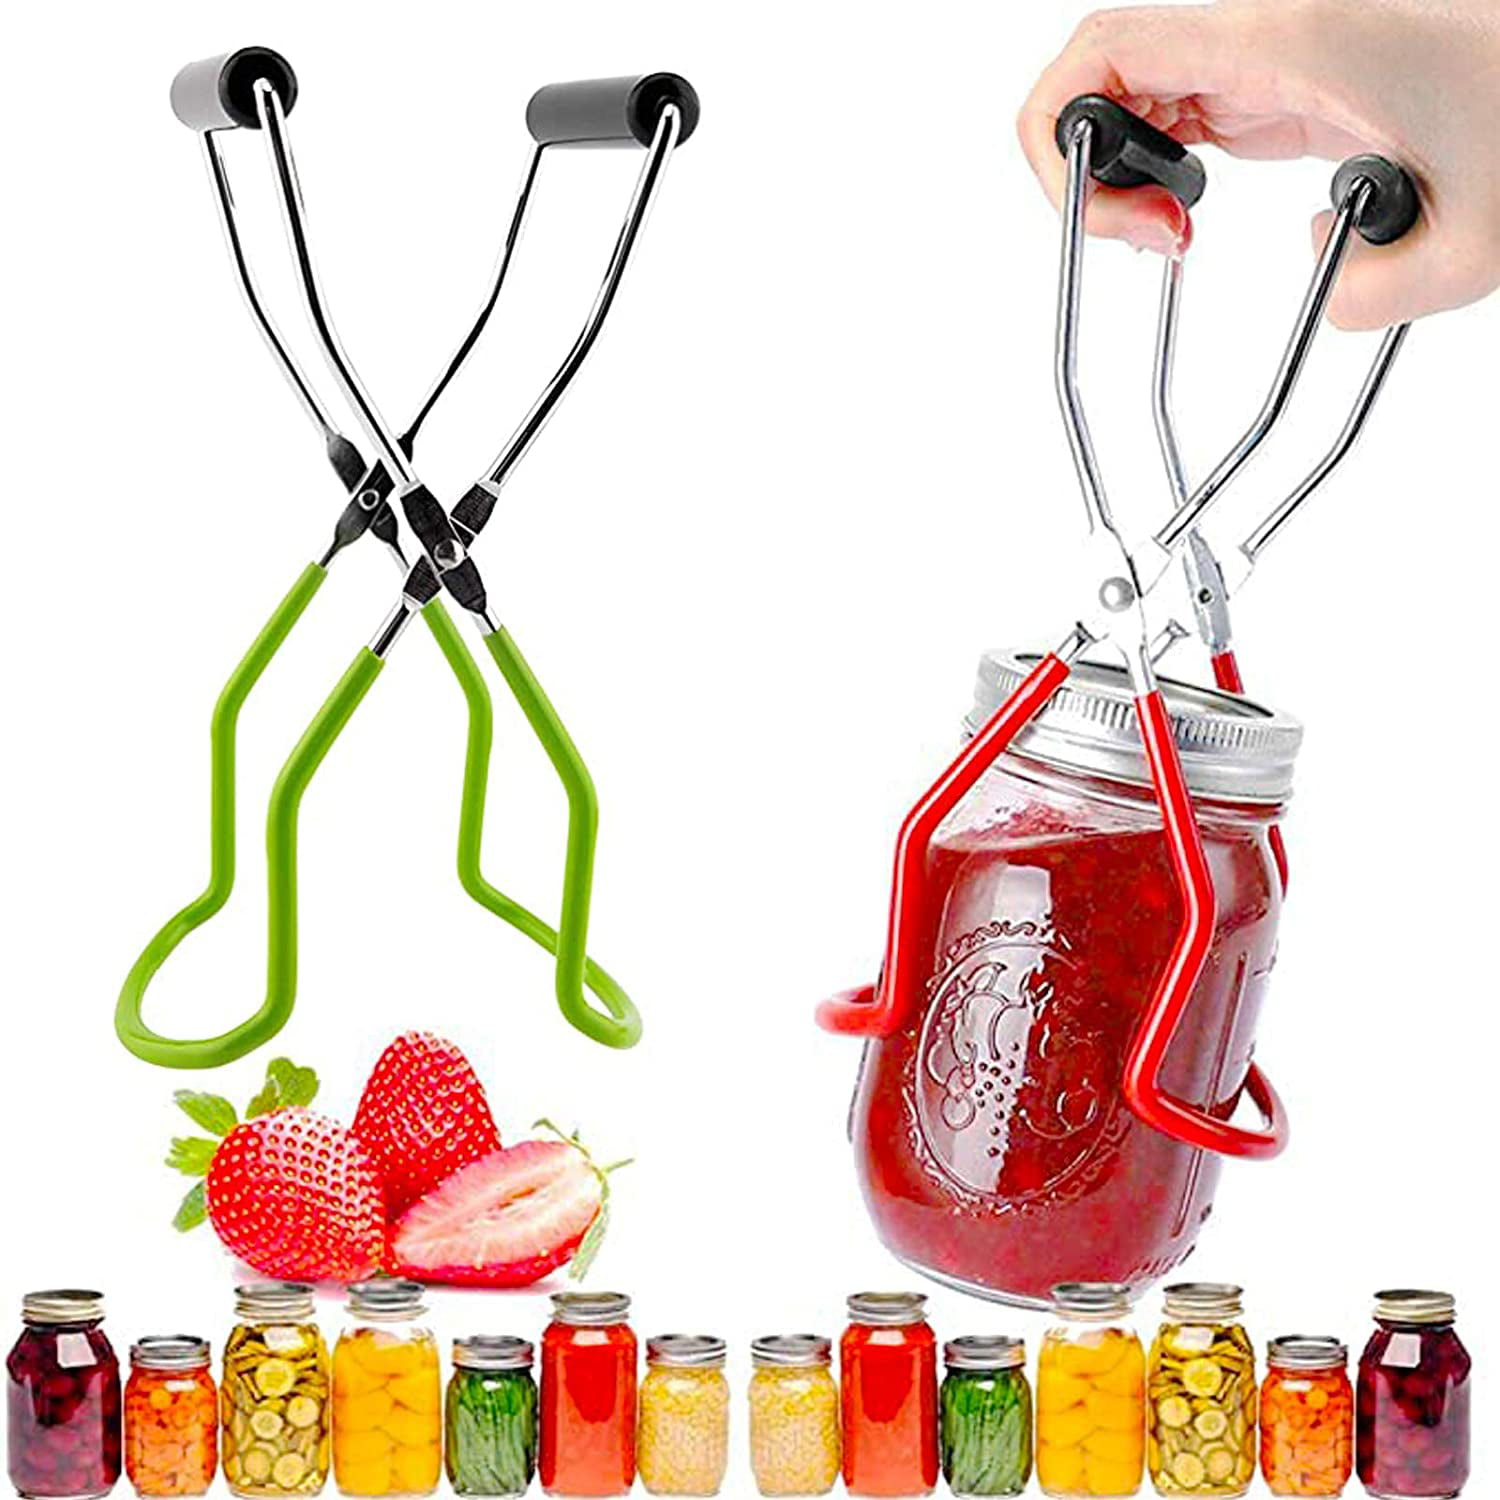 Details about   Anti-Scald Anti-Skid Canning Tongs Stainless Steel Jar Lifter with Grip Handle 